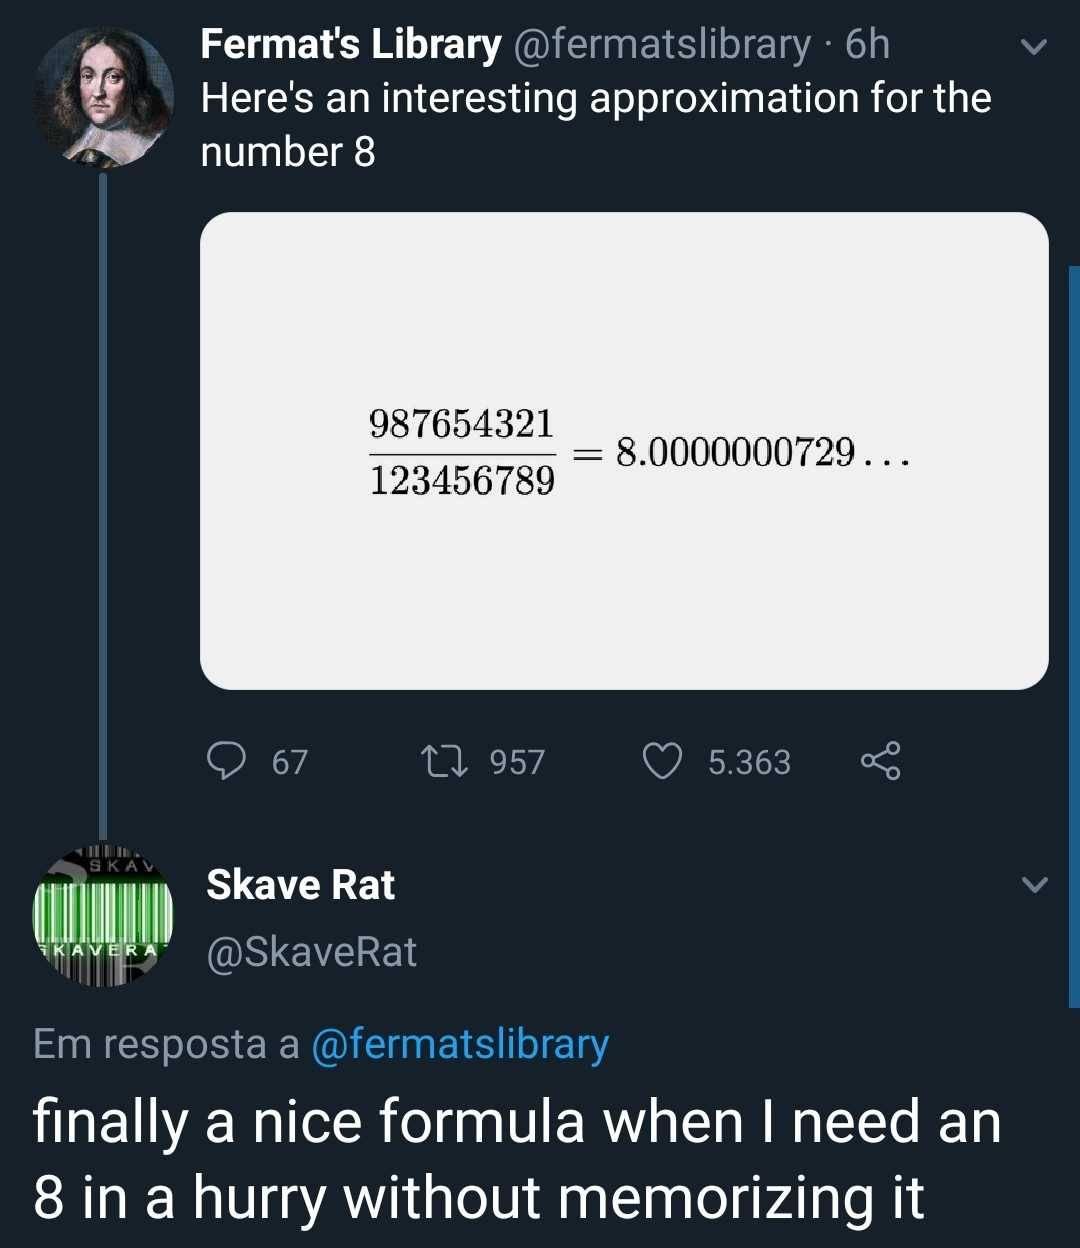 twitter memes - math memes - Fermat's Library 6h Here's an interesting approximation for the number 8 987654321 123456789 8.0000000729... 9 67 27 957 5.363 Skav Skave Rat Kavera Em resposta a finally a nice formula when I need an 8 in a hurry without memo